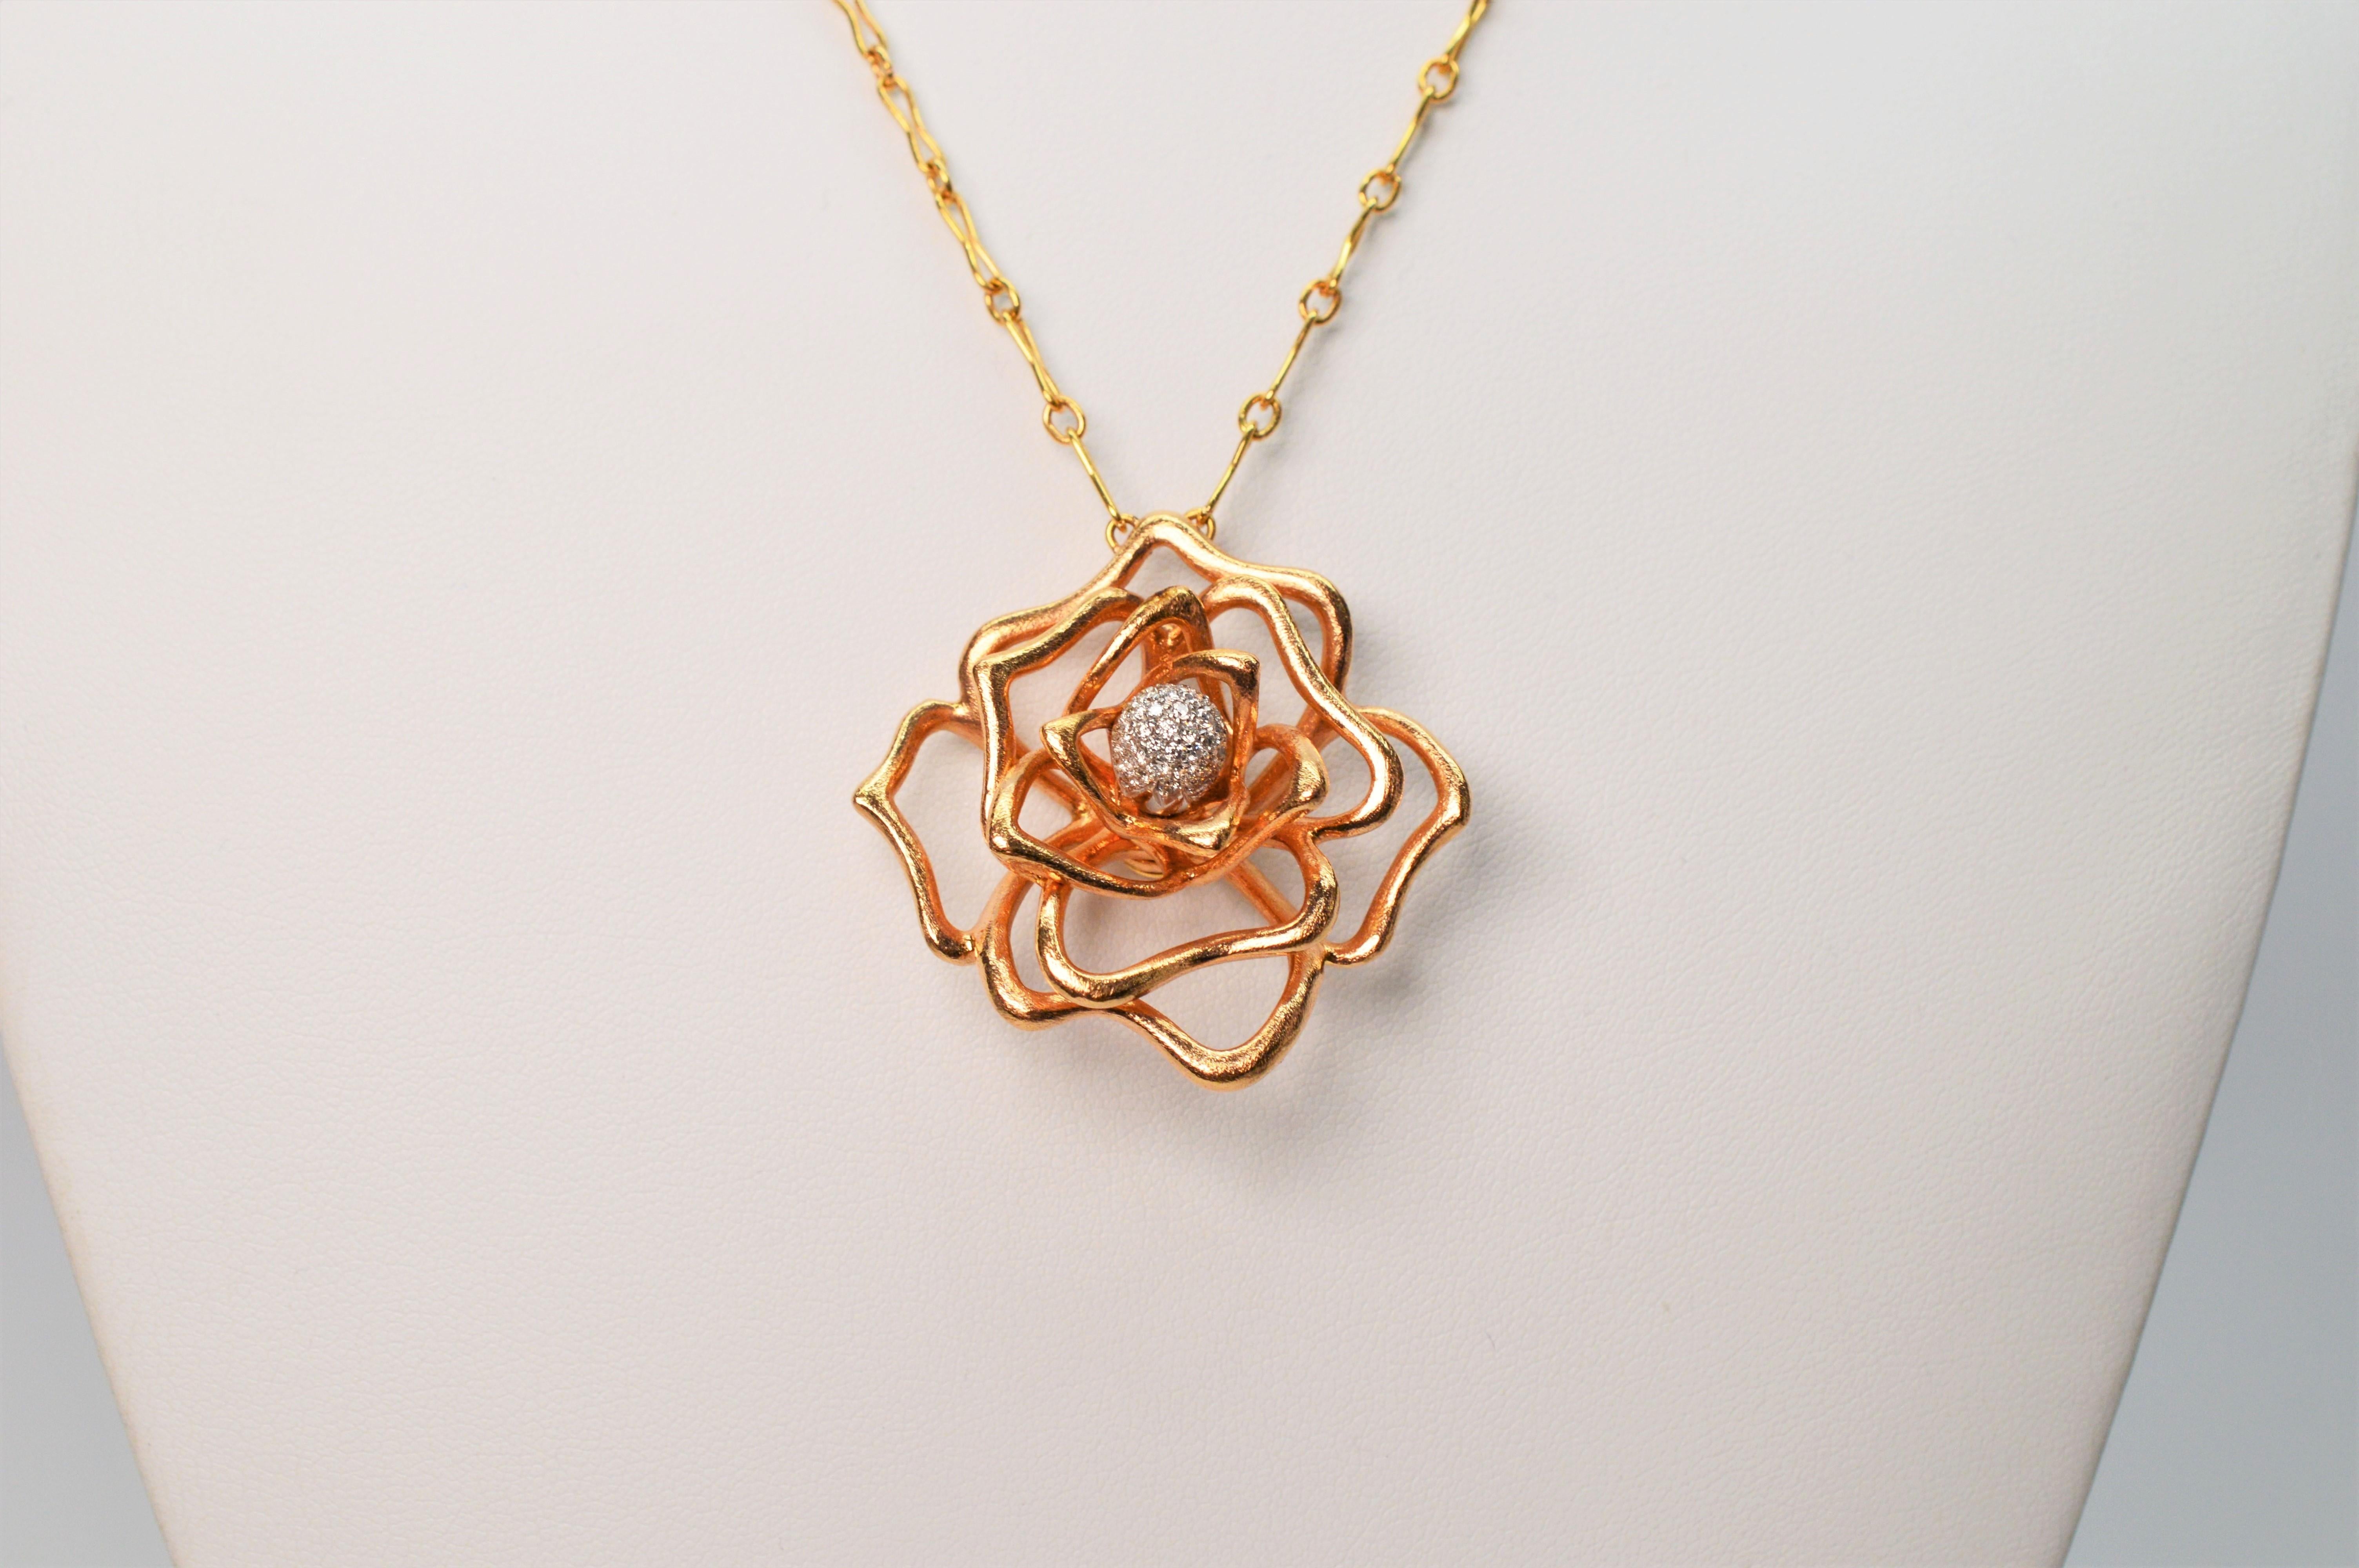 Roberto Coin Diamond Rose Gold Flower Necklace In Excellent Condition For Sale In Mount Kisco, NY